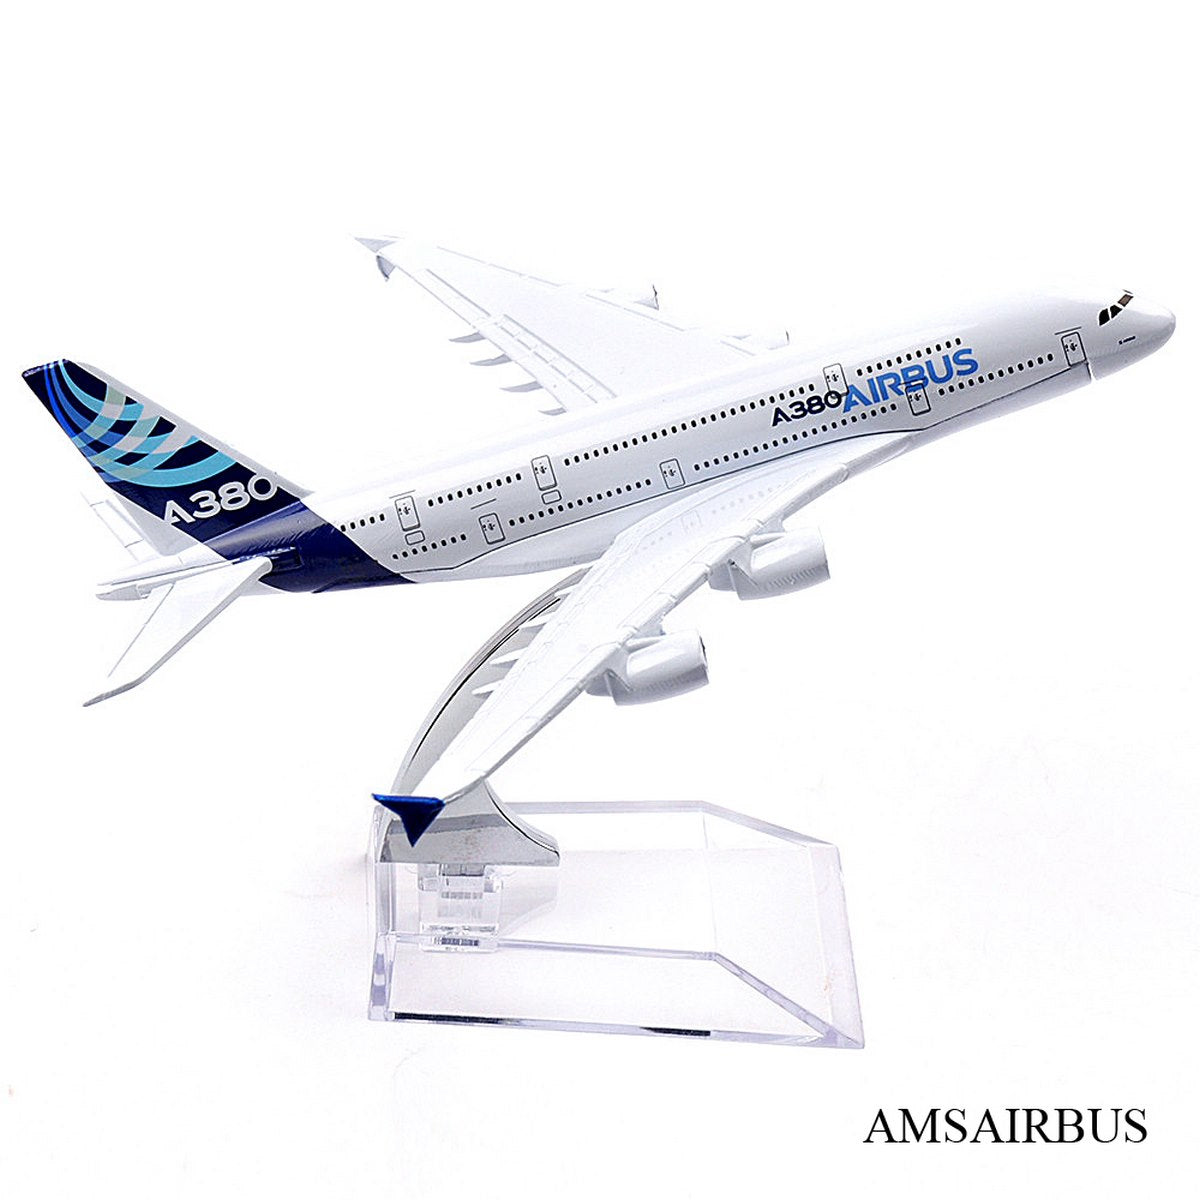 Aircraft Model Small Airbus-A380 - For Office Use, Personal Use, or Corporate Gifting-JA